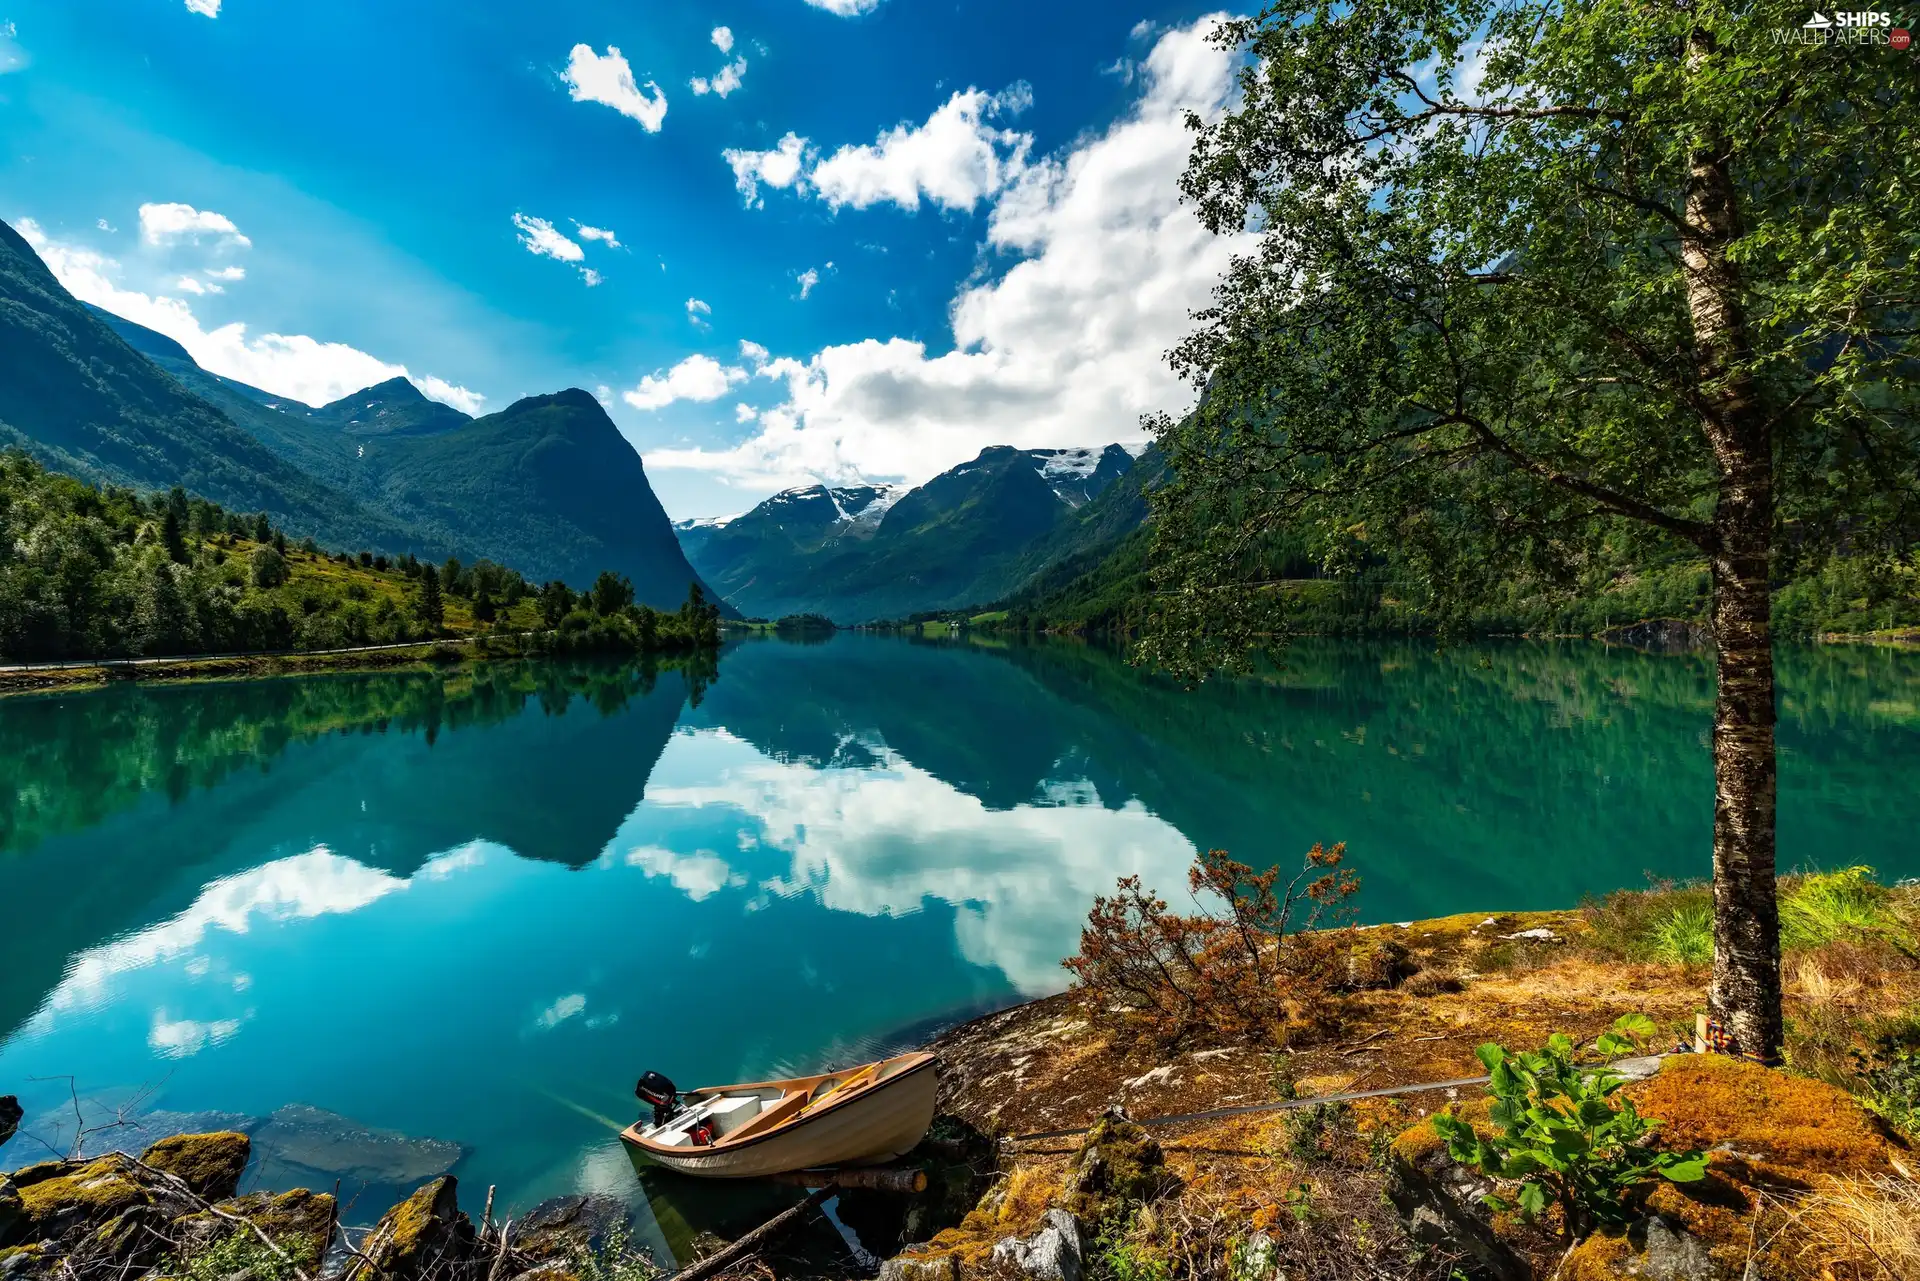 District of Sogn og Fjordane, Norway, lake, Mountains, Boat, reflection, viewes, clouds, trees